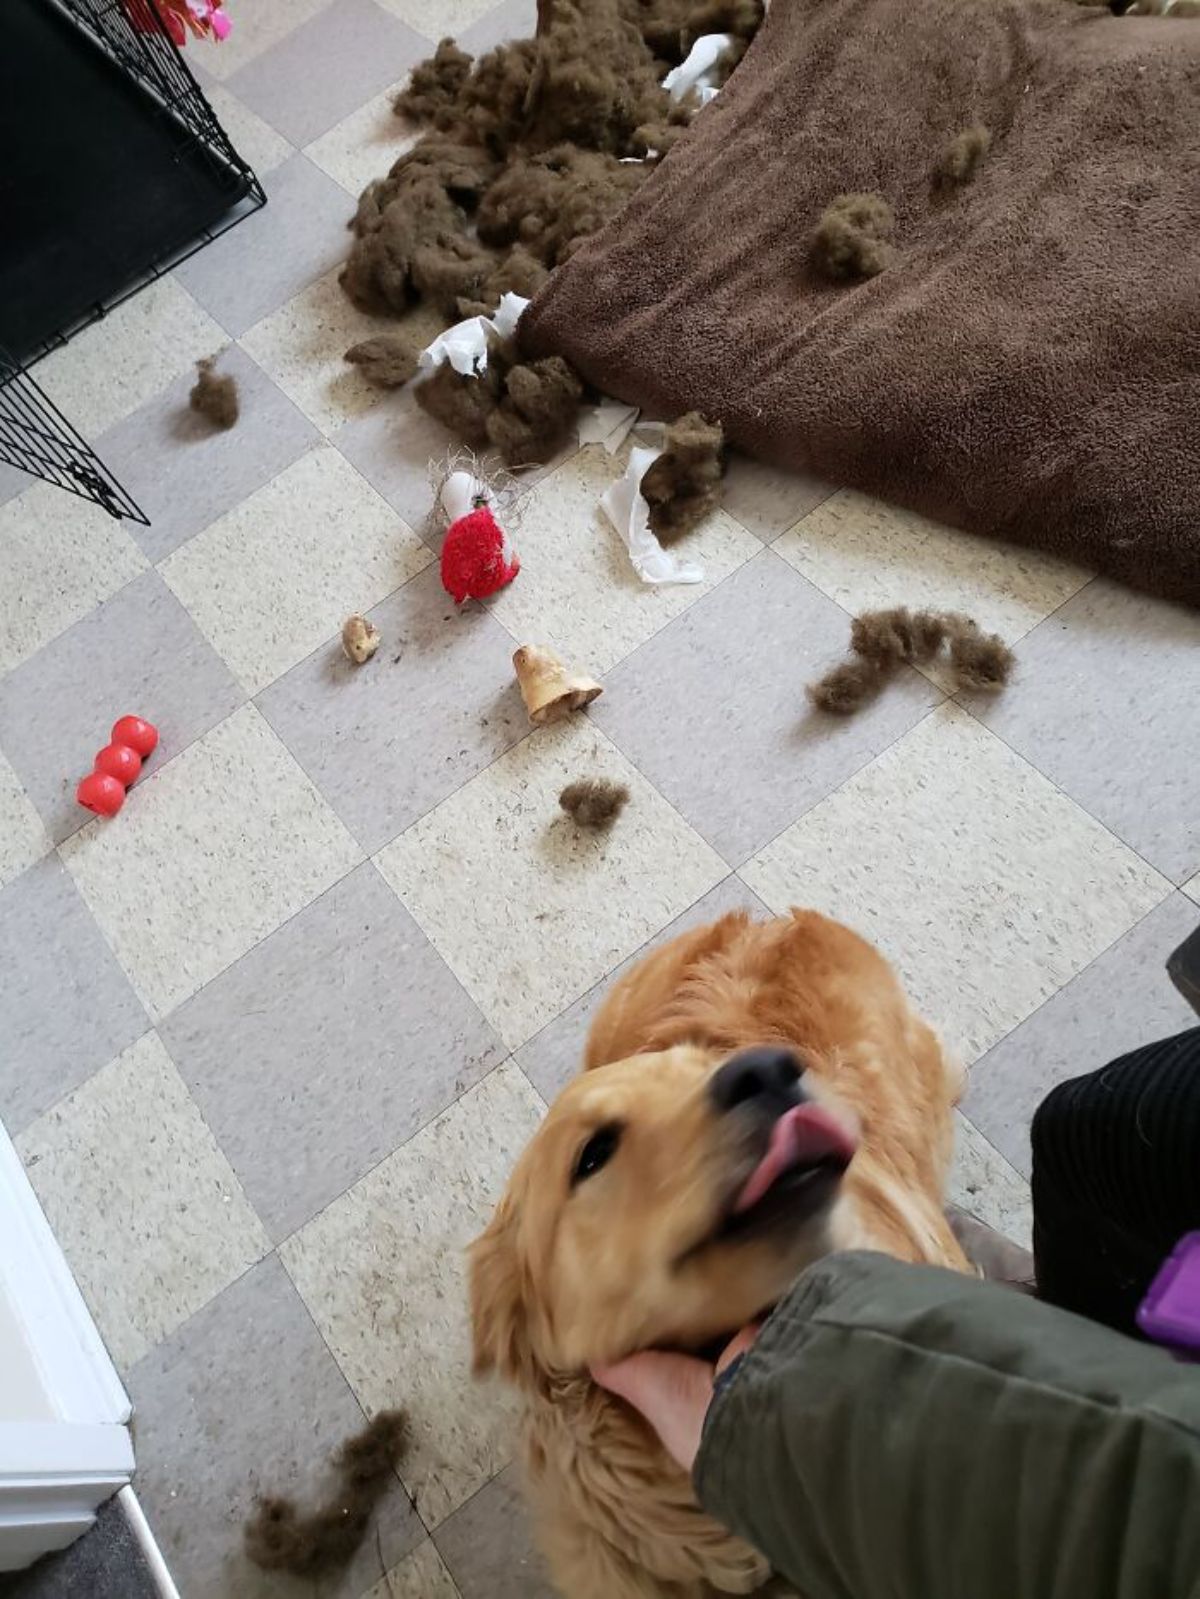 golden retriever being petted with a ripped up brown dog bed and toys behind the dog